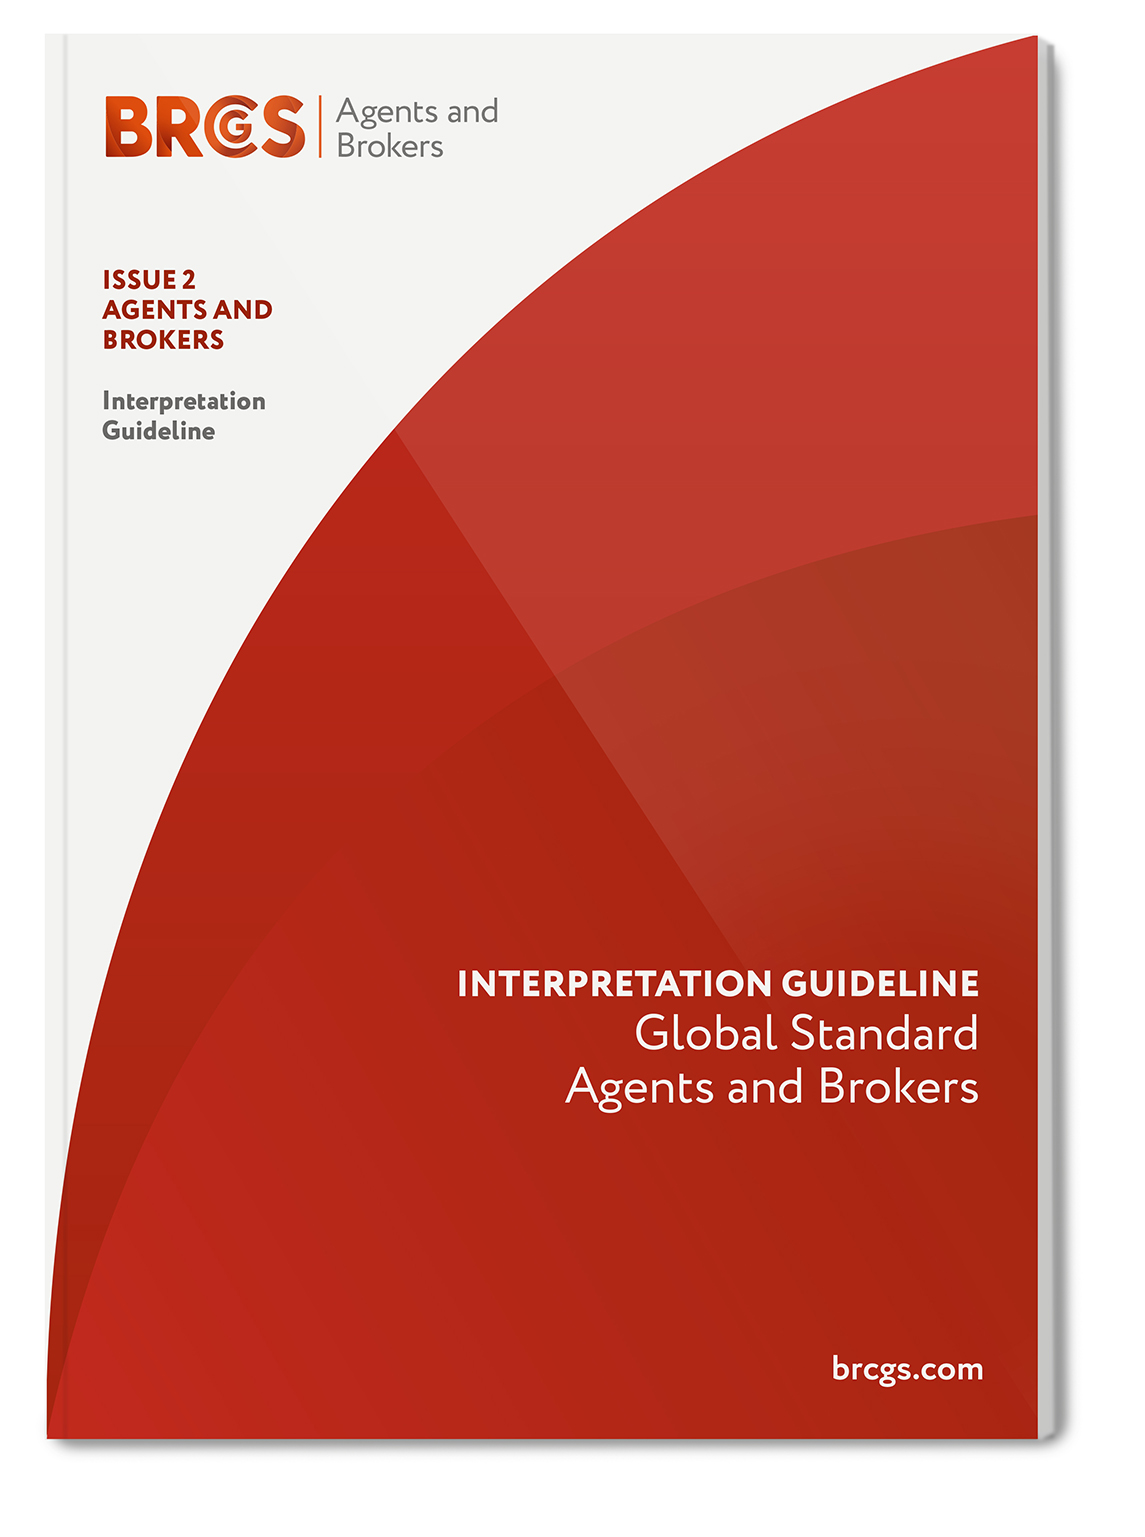 Global Standard for Agents and Brokers (Issue 2) Interpretation Guideline